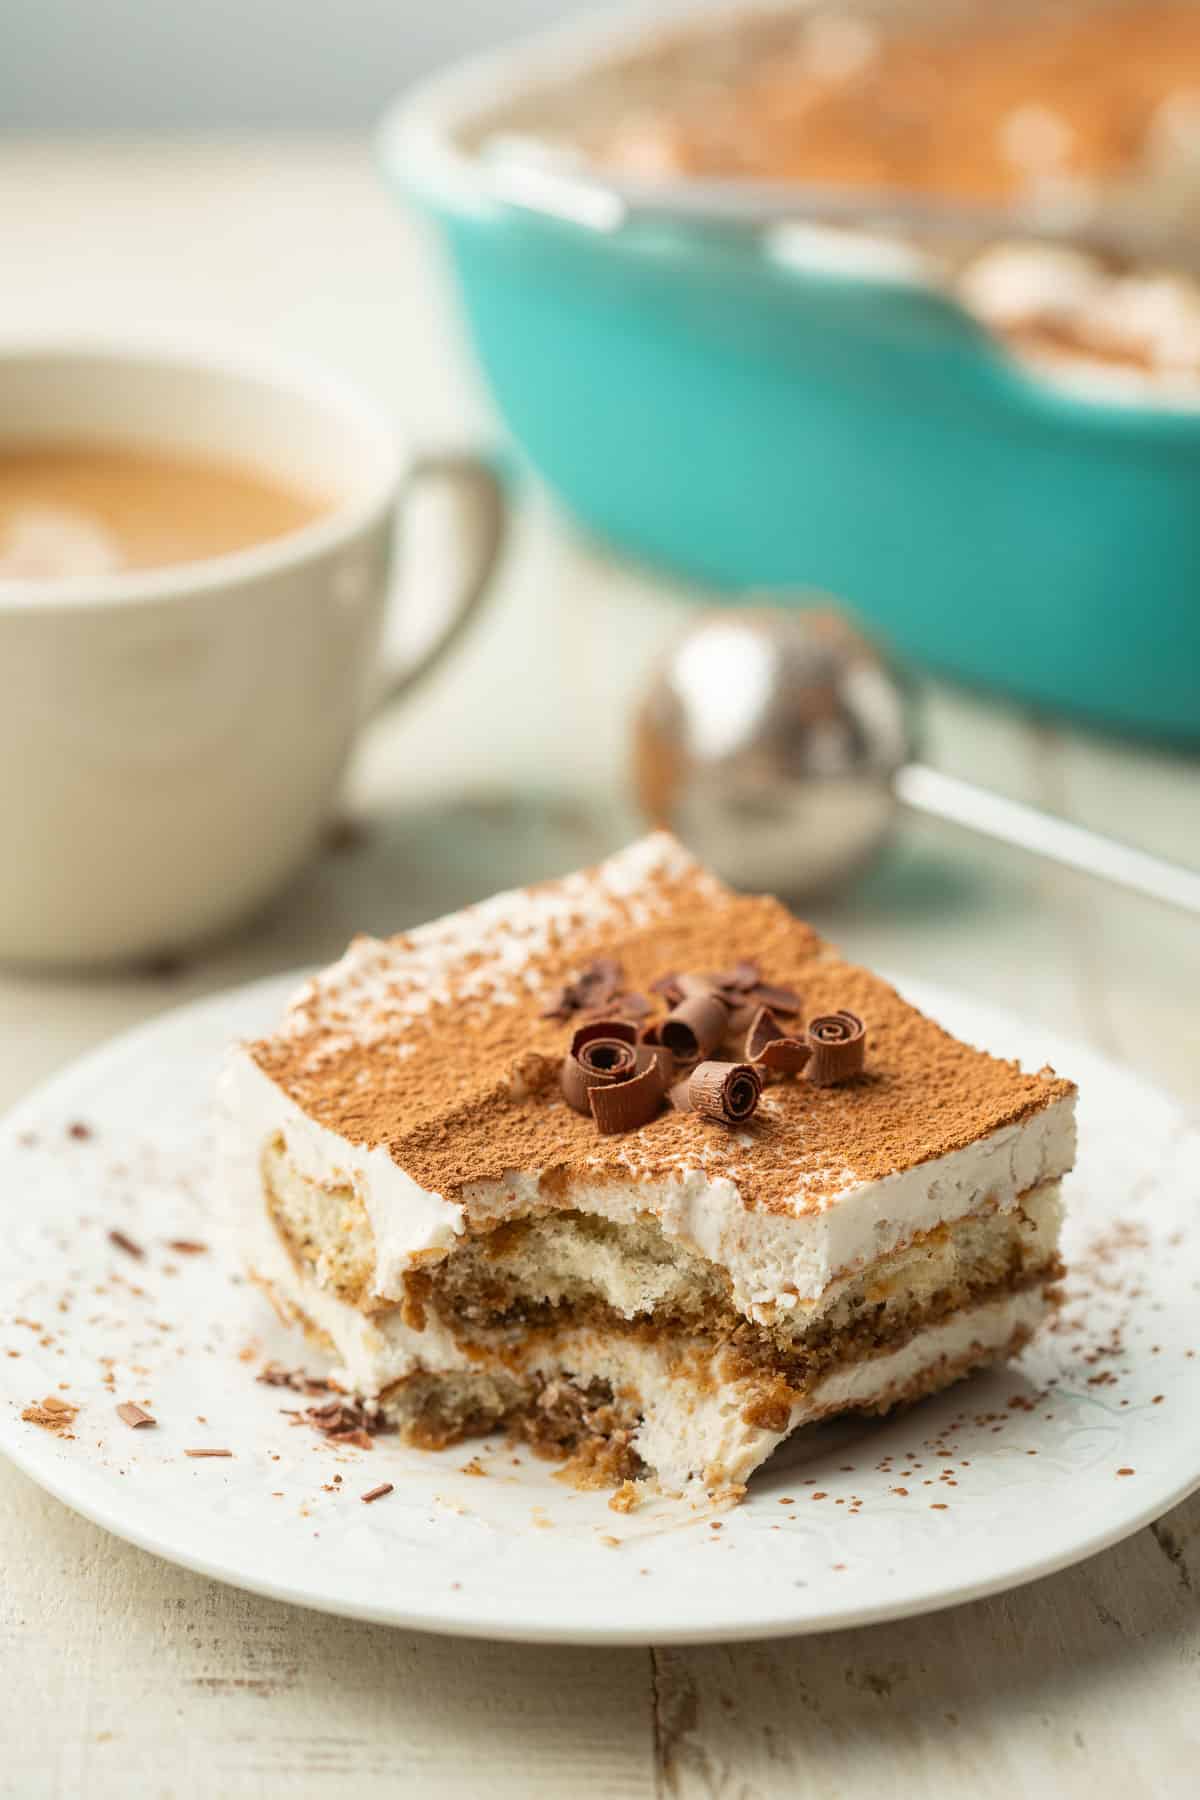 Slice of Vegan Tiramisu on a plate with coffee cup and blue baking dish in the background.